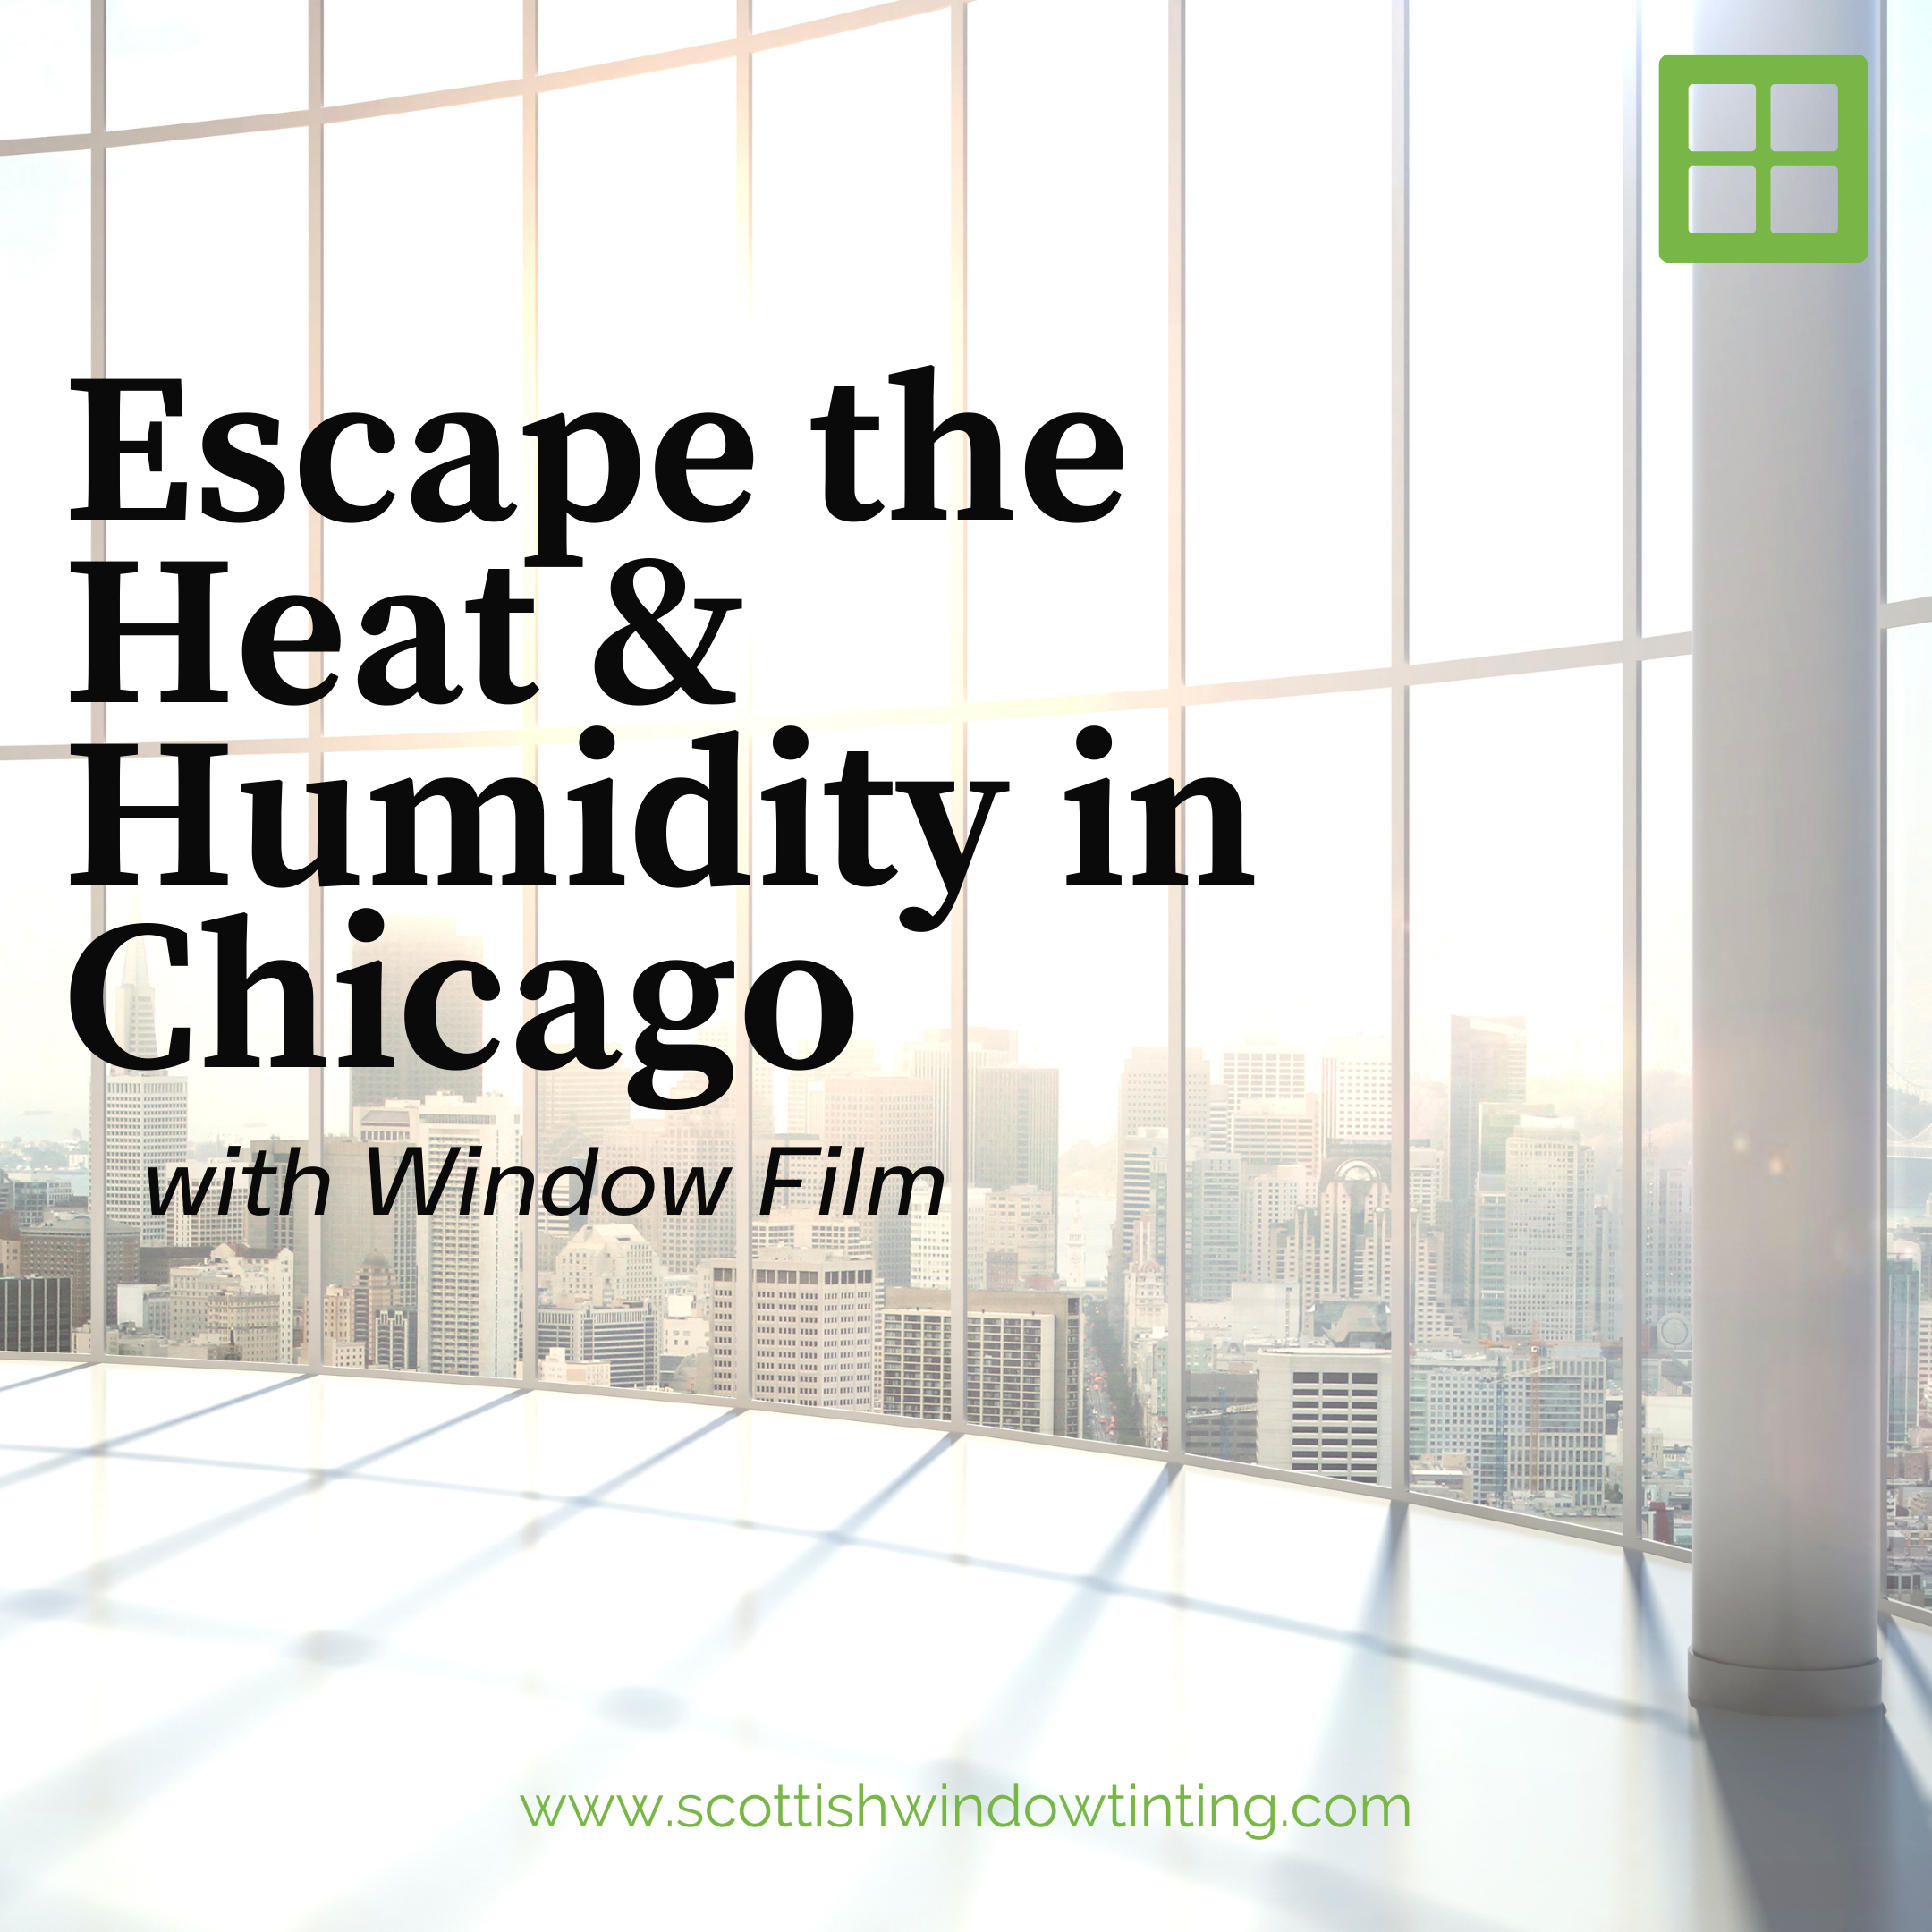 Escape the Heat & Humidity in Chicago with Window Film